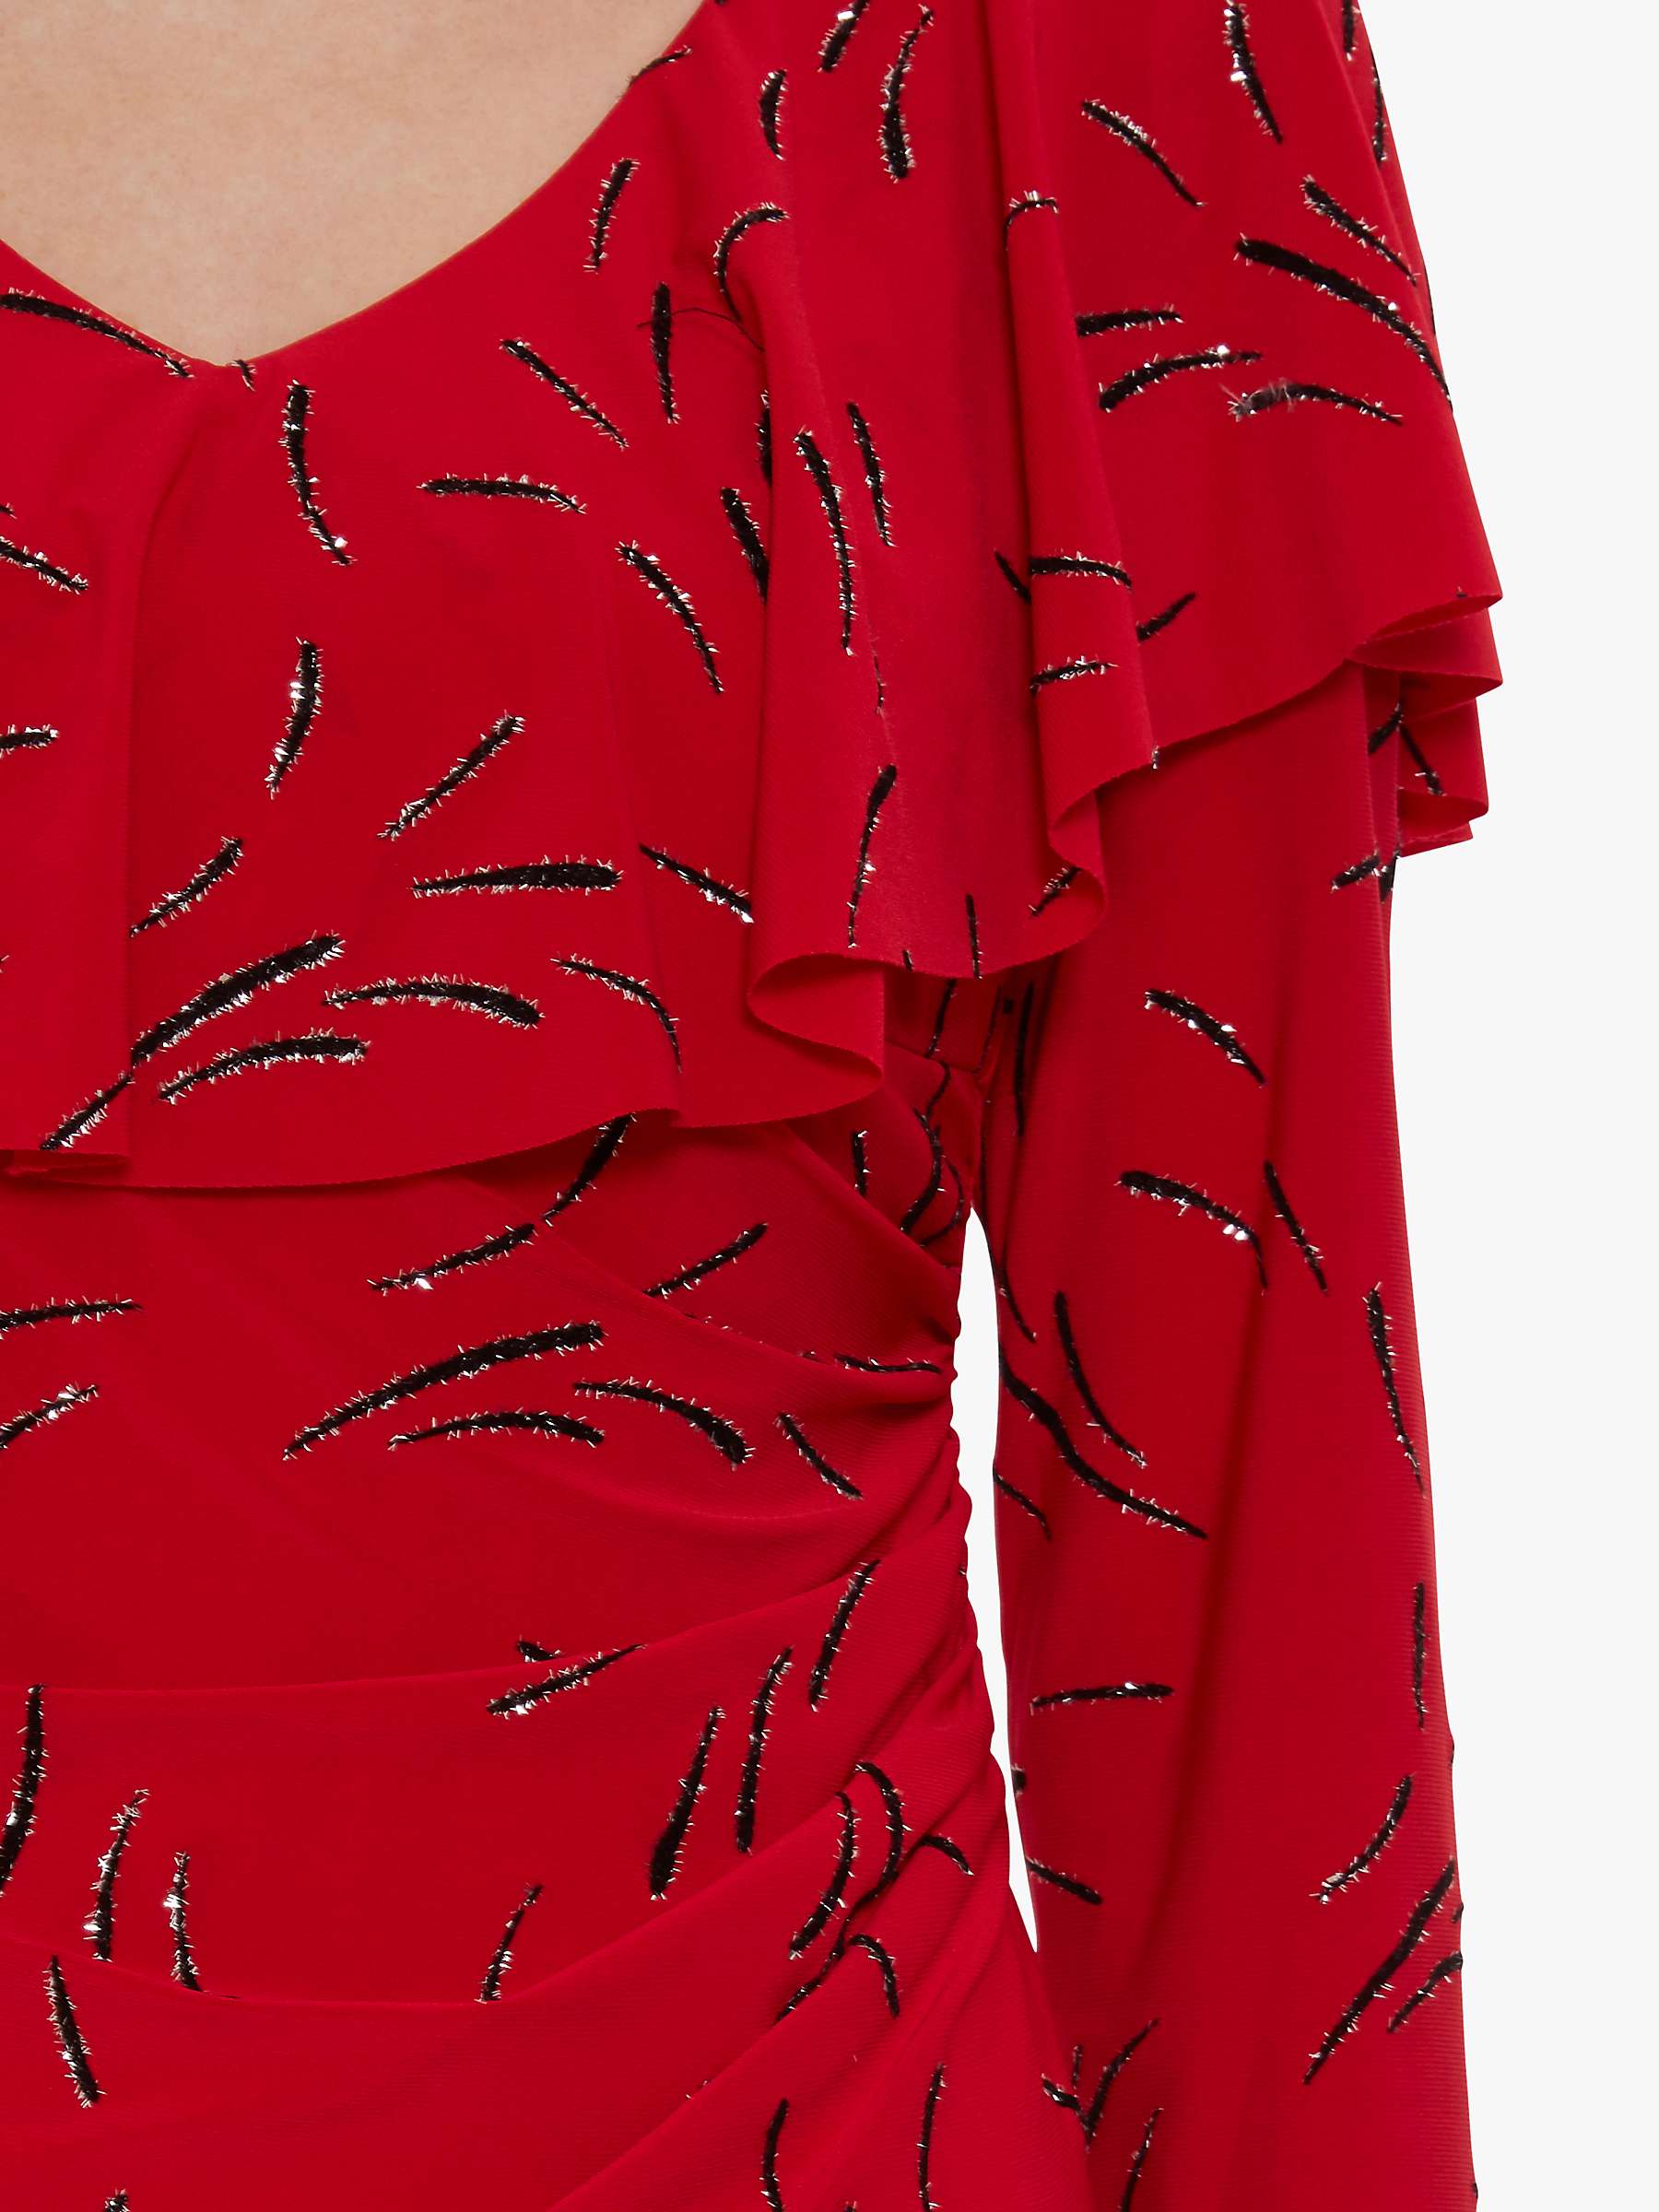 Buy Gina Bacconi Suuri Frill Dress, Red Online at johnlewis.com